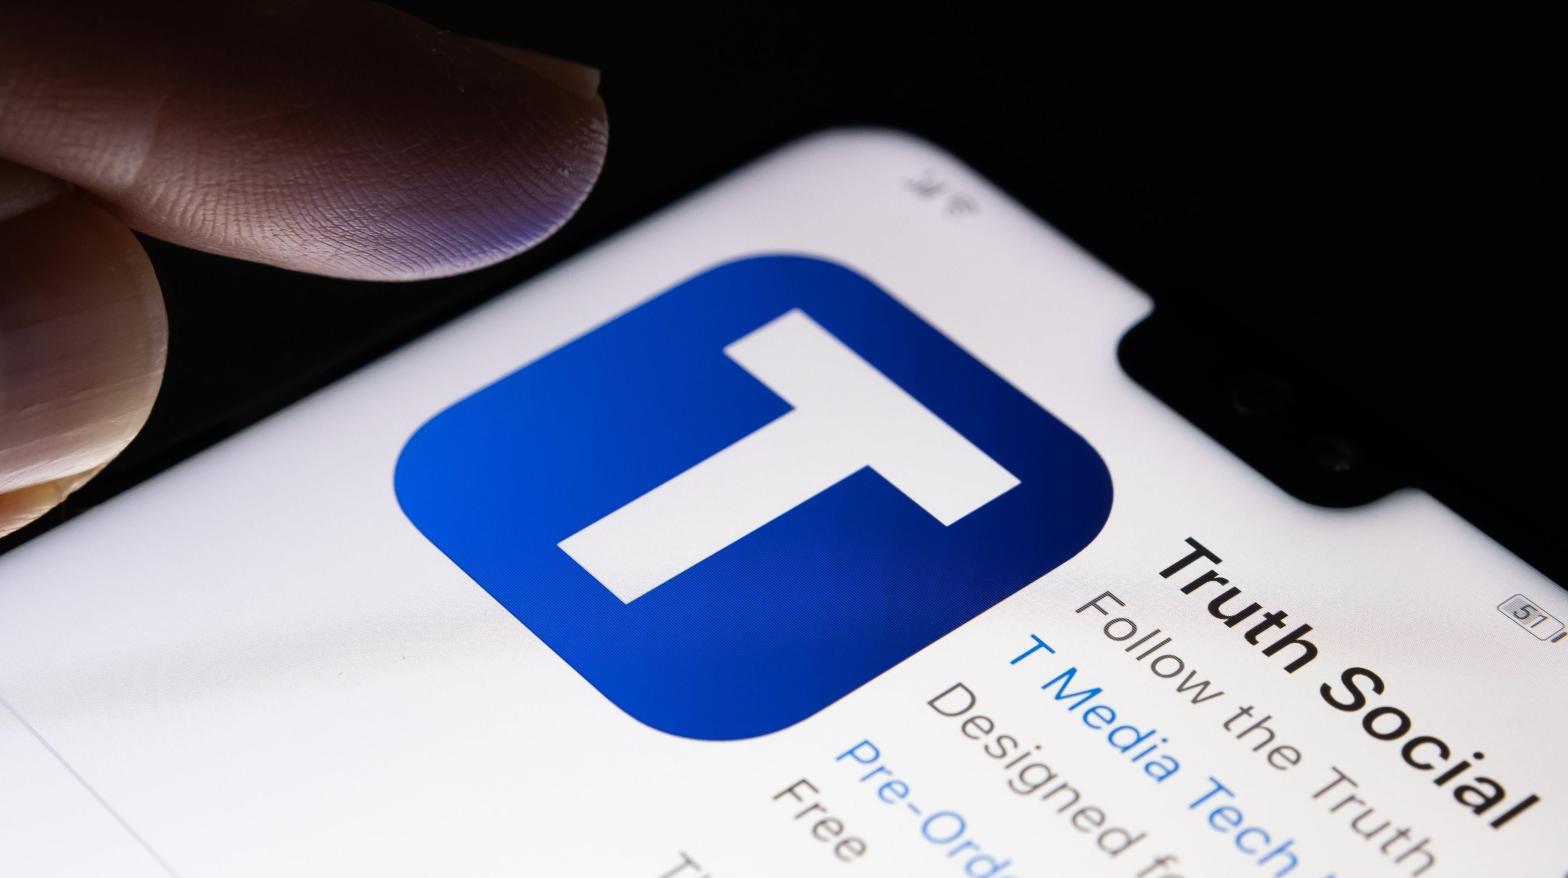 Though Apple has allowed Truth Social on its App Store for months, Google only approved the app available for Android devices on Wednesday. (Photo: mundissima, Shutterstock)